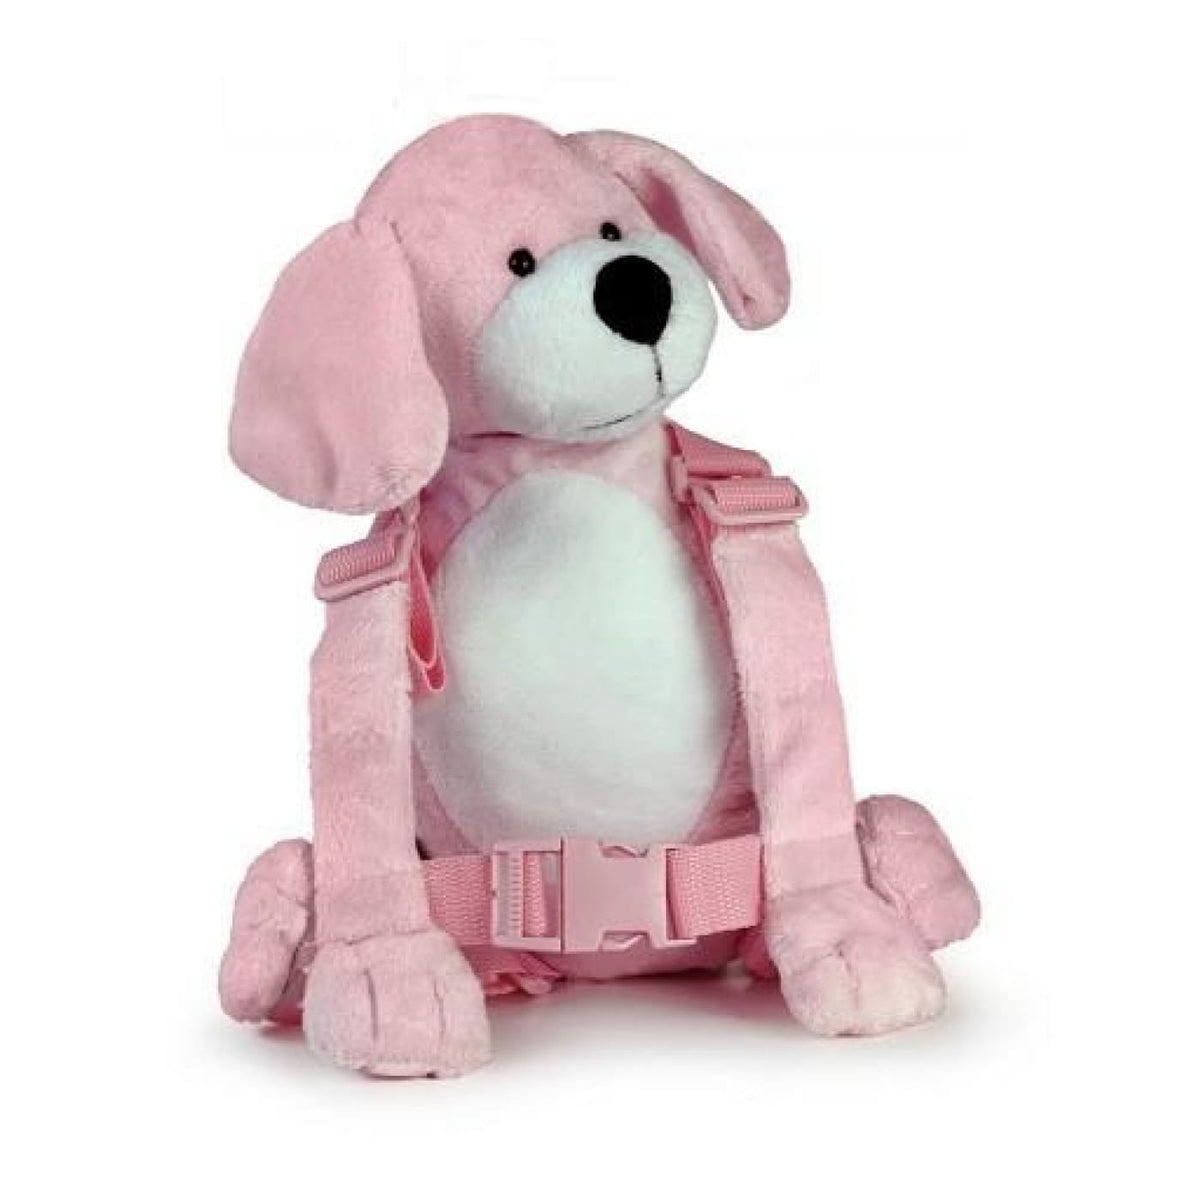 Playette 2 in 1 Harness Buddy - Pink Puppy - ON THE GO - SAFETY HARNESSES